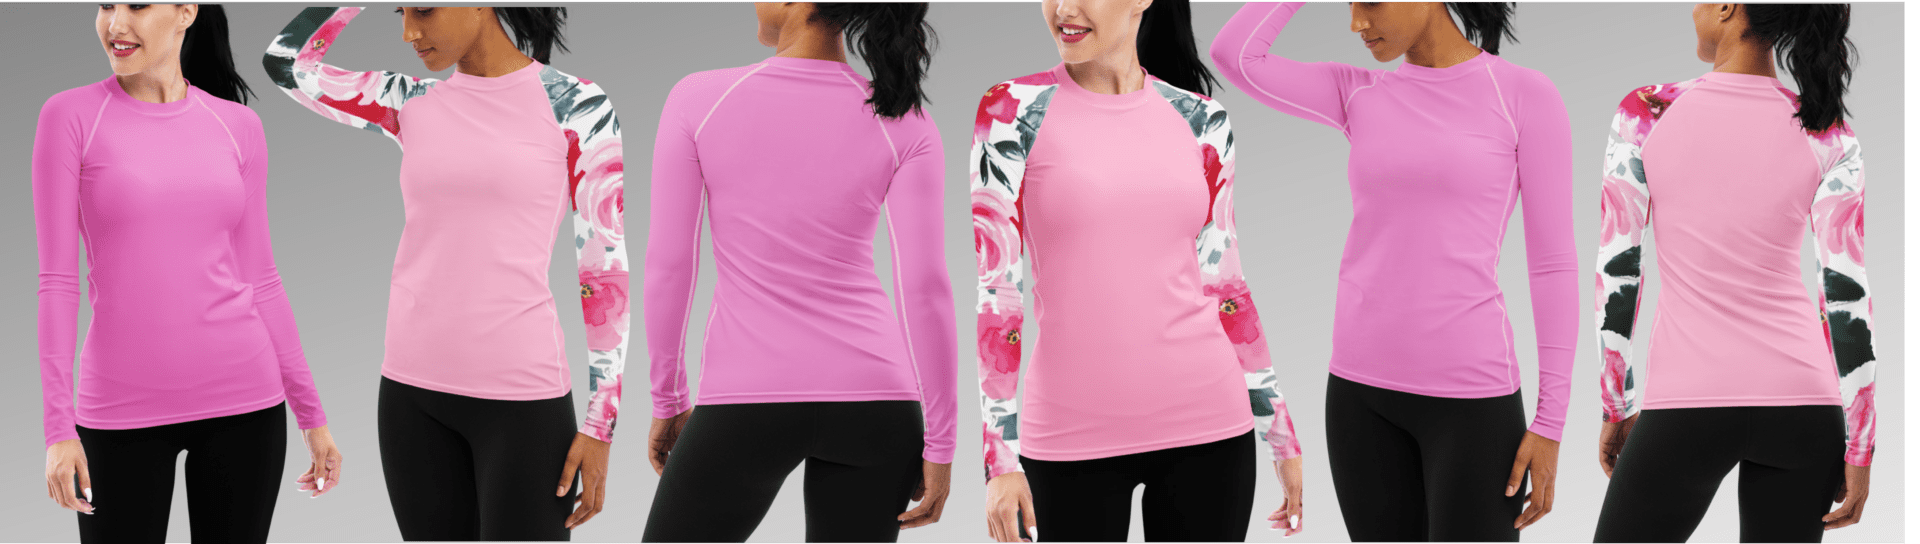 Pink long sleeve shirt with floral print.